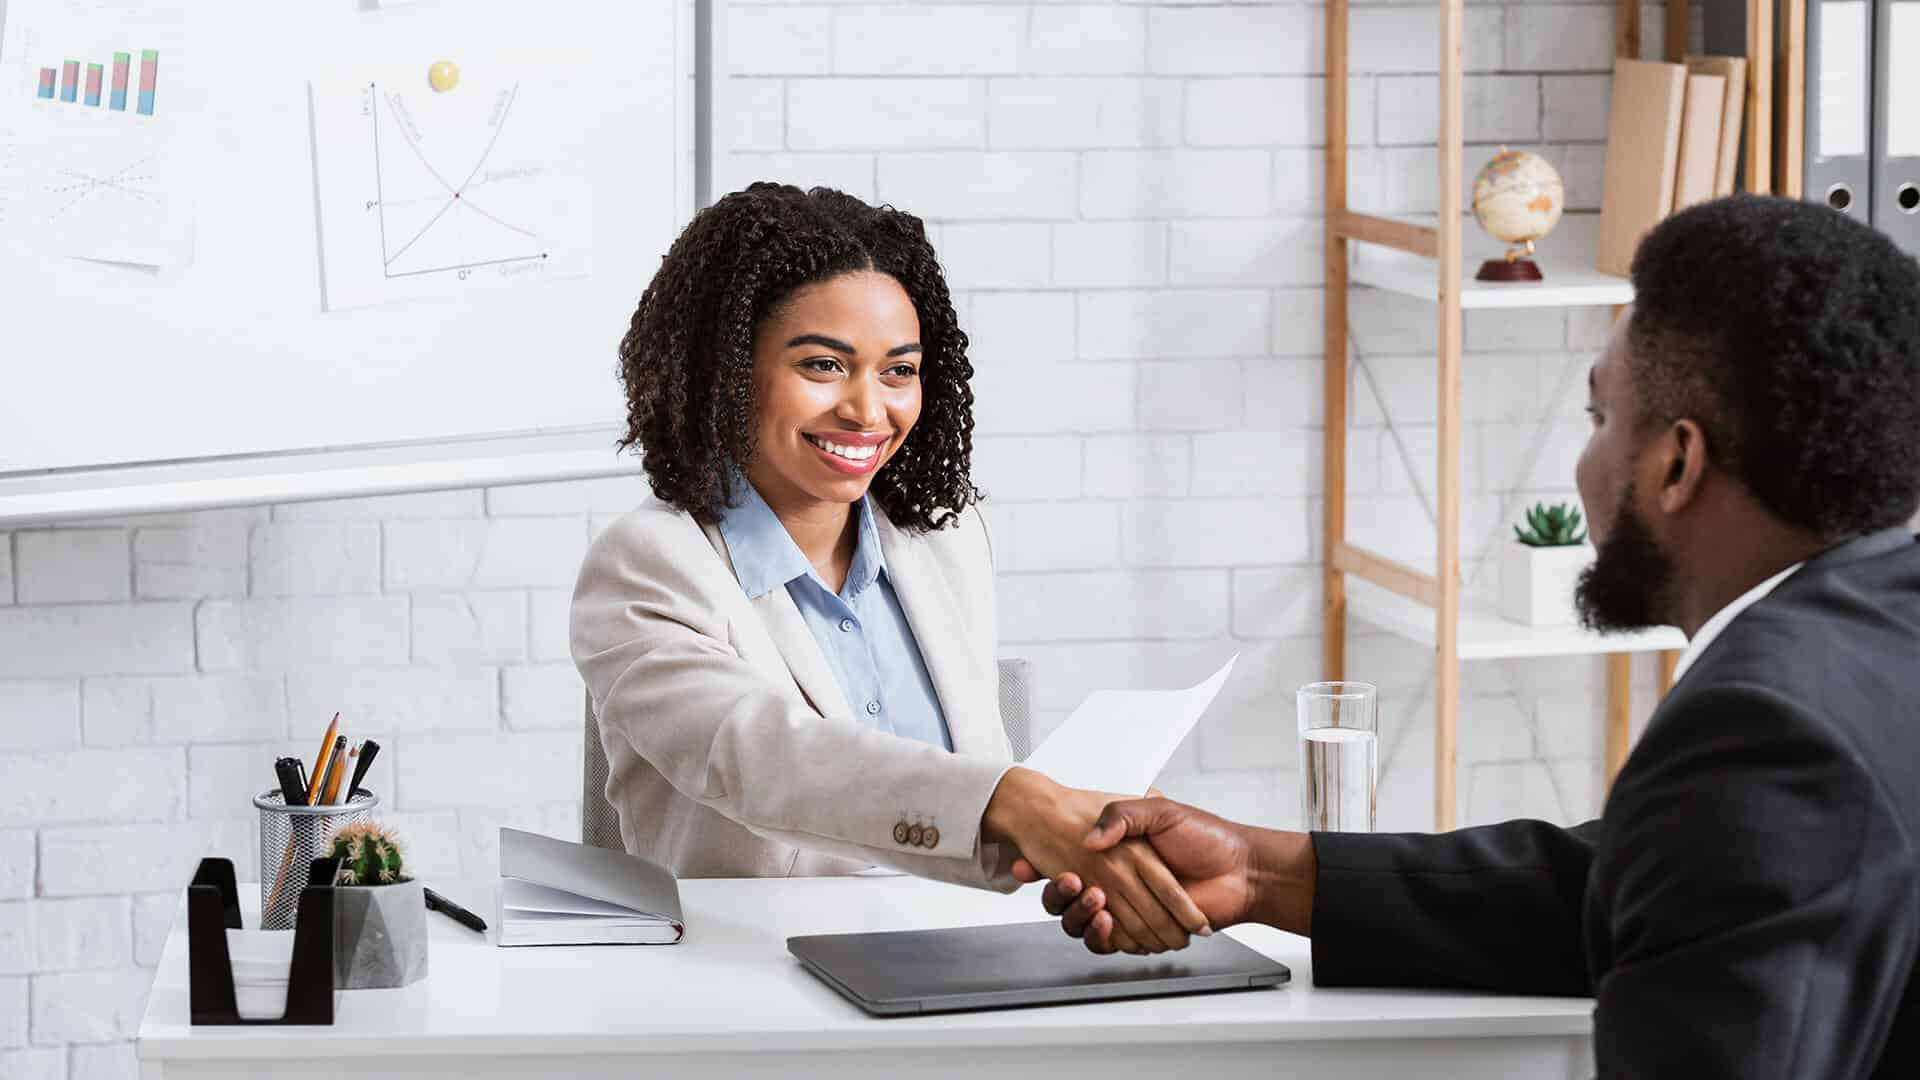 Black personnel  Management. Black personnel  Management in Africa. Black personnel  Management in Africa photo. African disabled job candidate and mature female Employer Shaking hands and smiling at Camera.